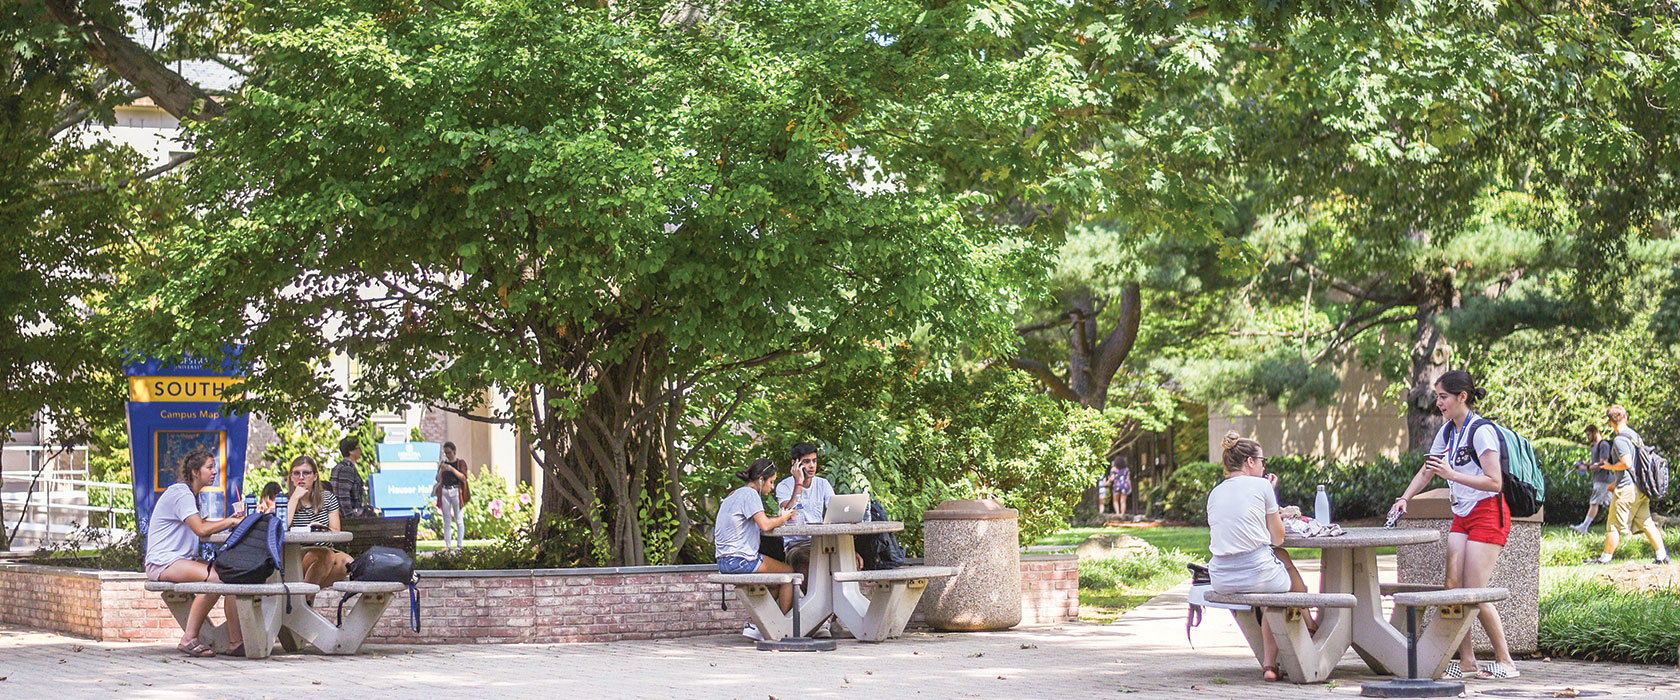 Students Outside on Campus